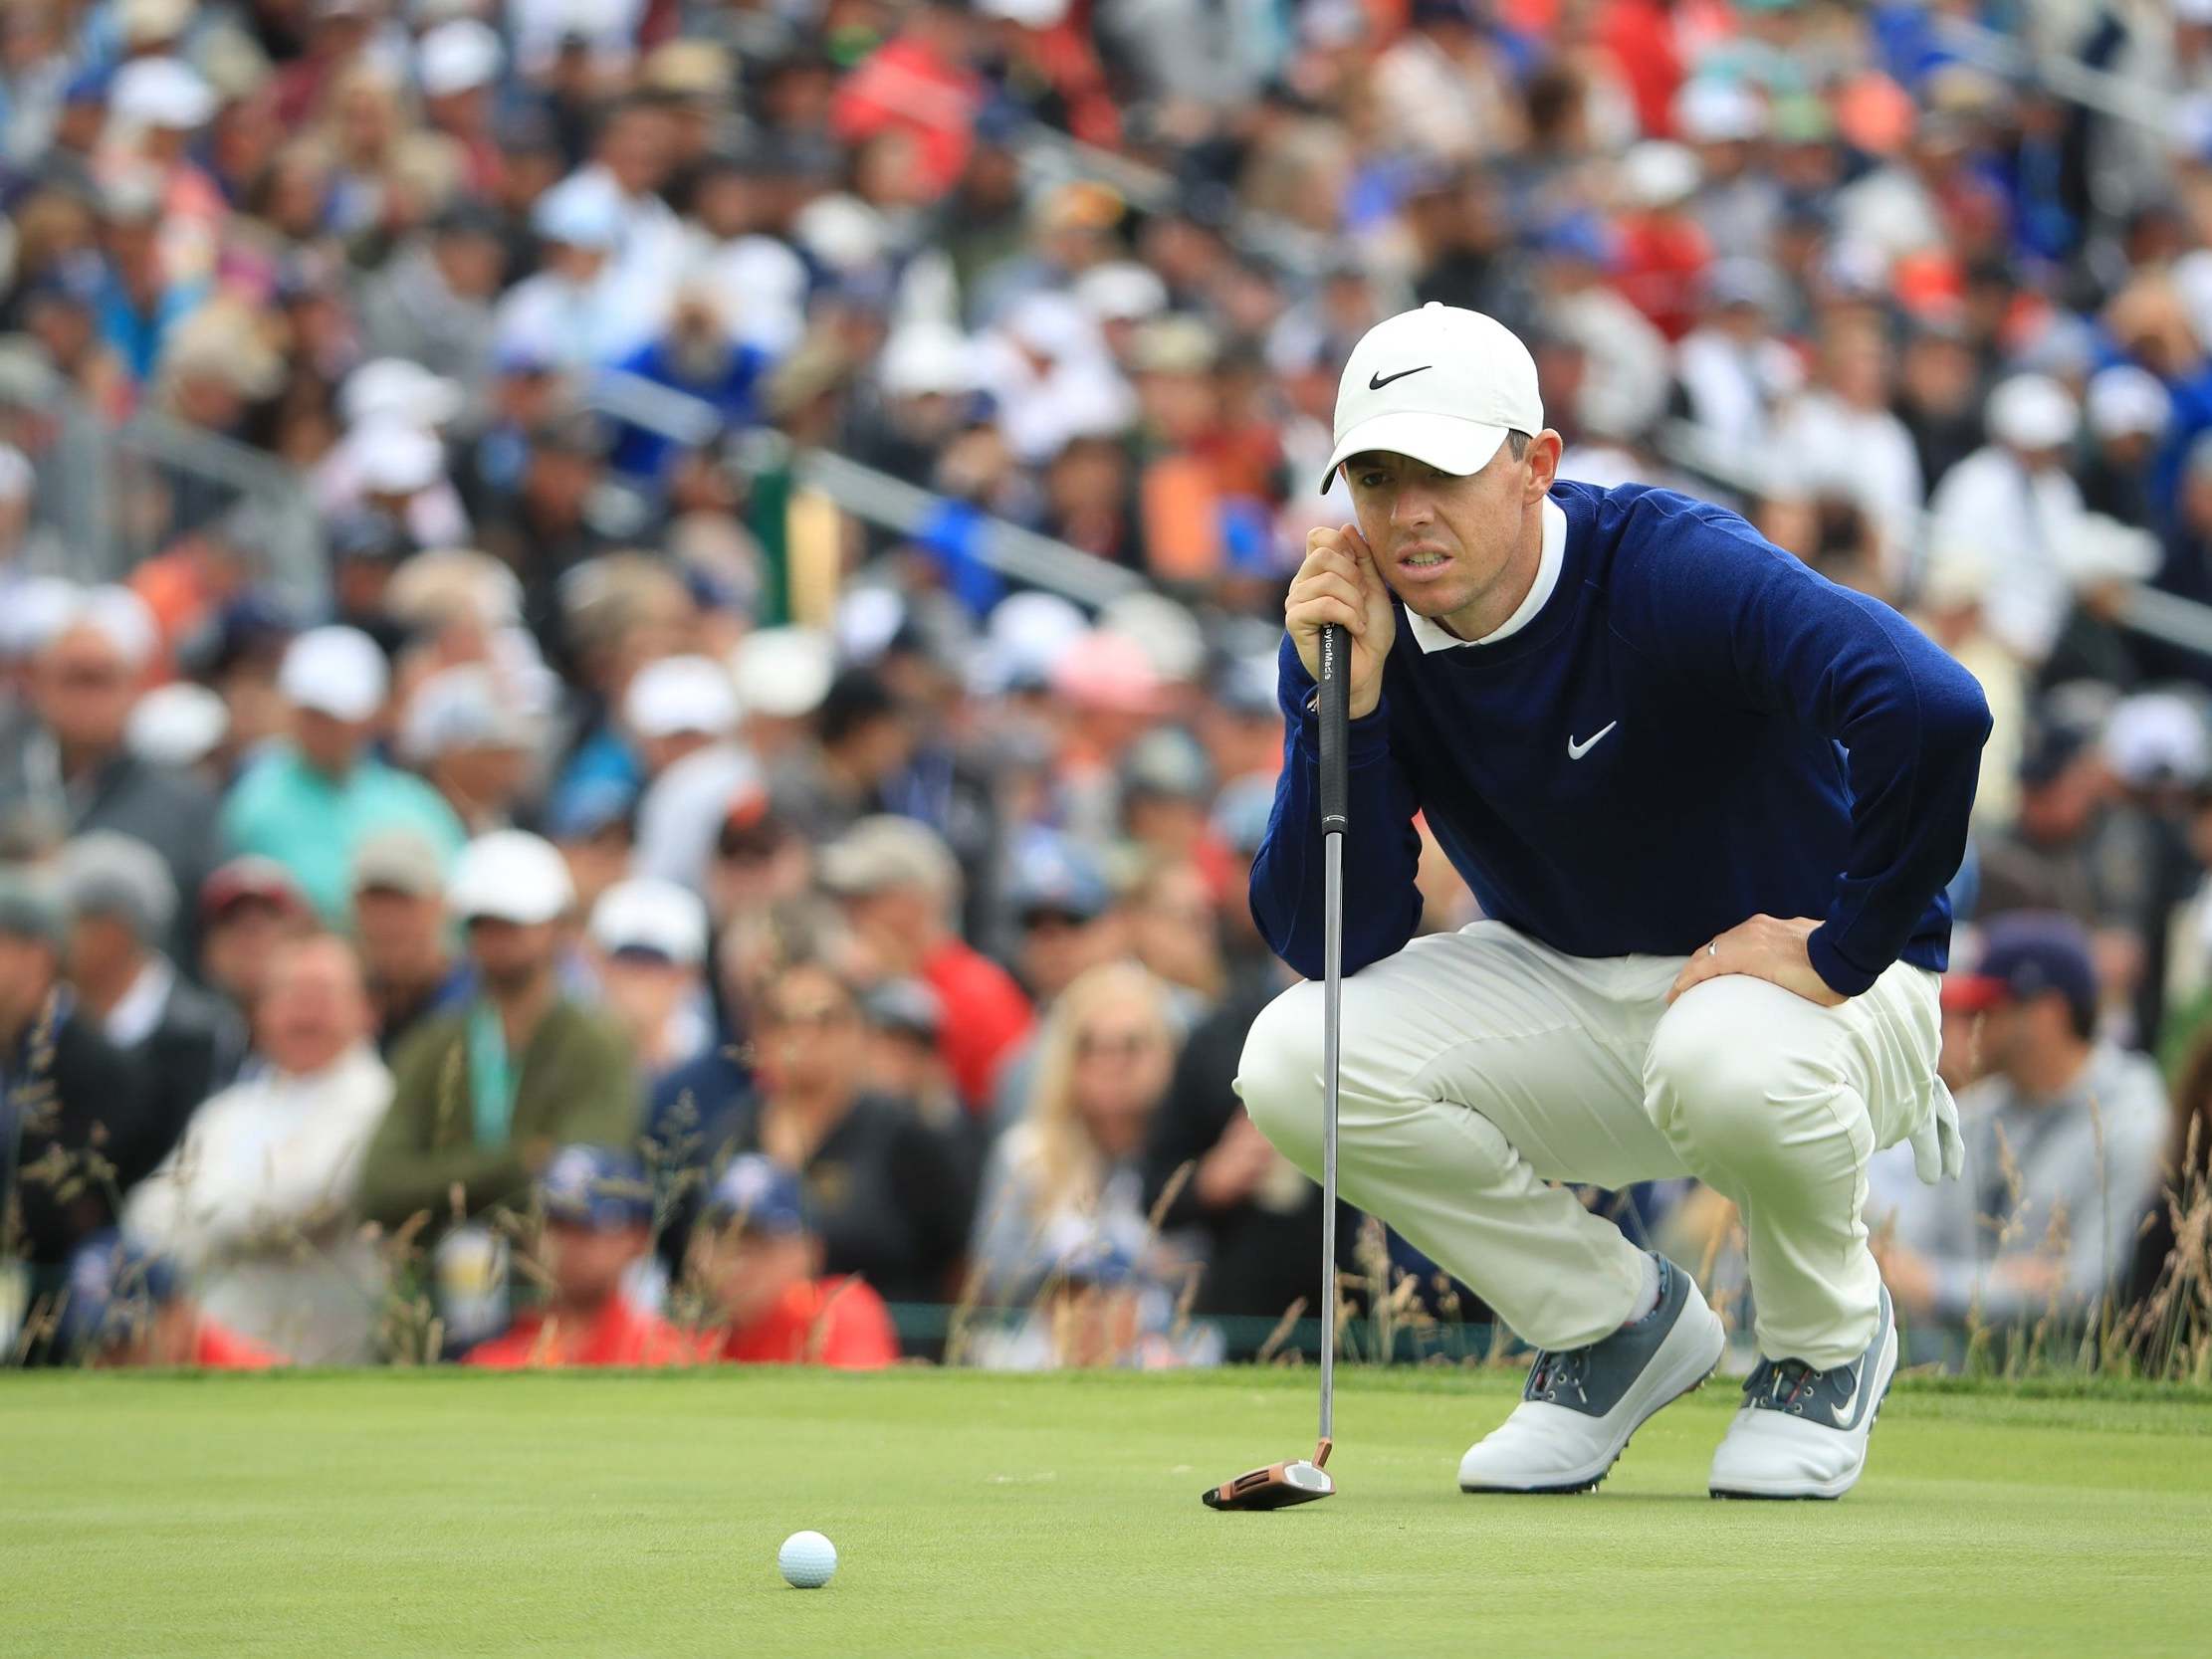 US Open 2019: Rory McIlroy makes fast start in first round at Pebble Beach